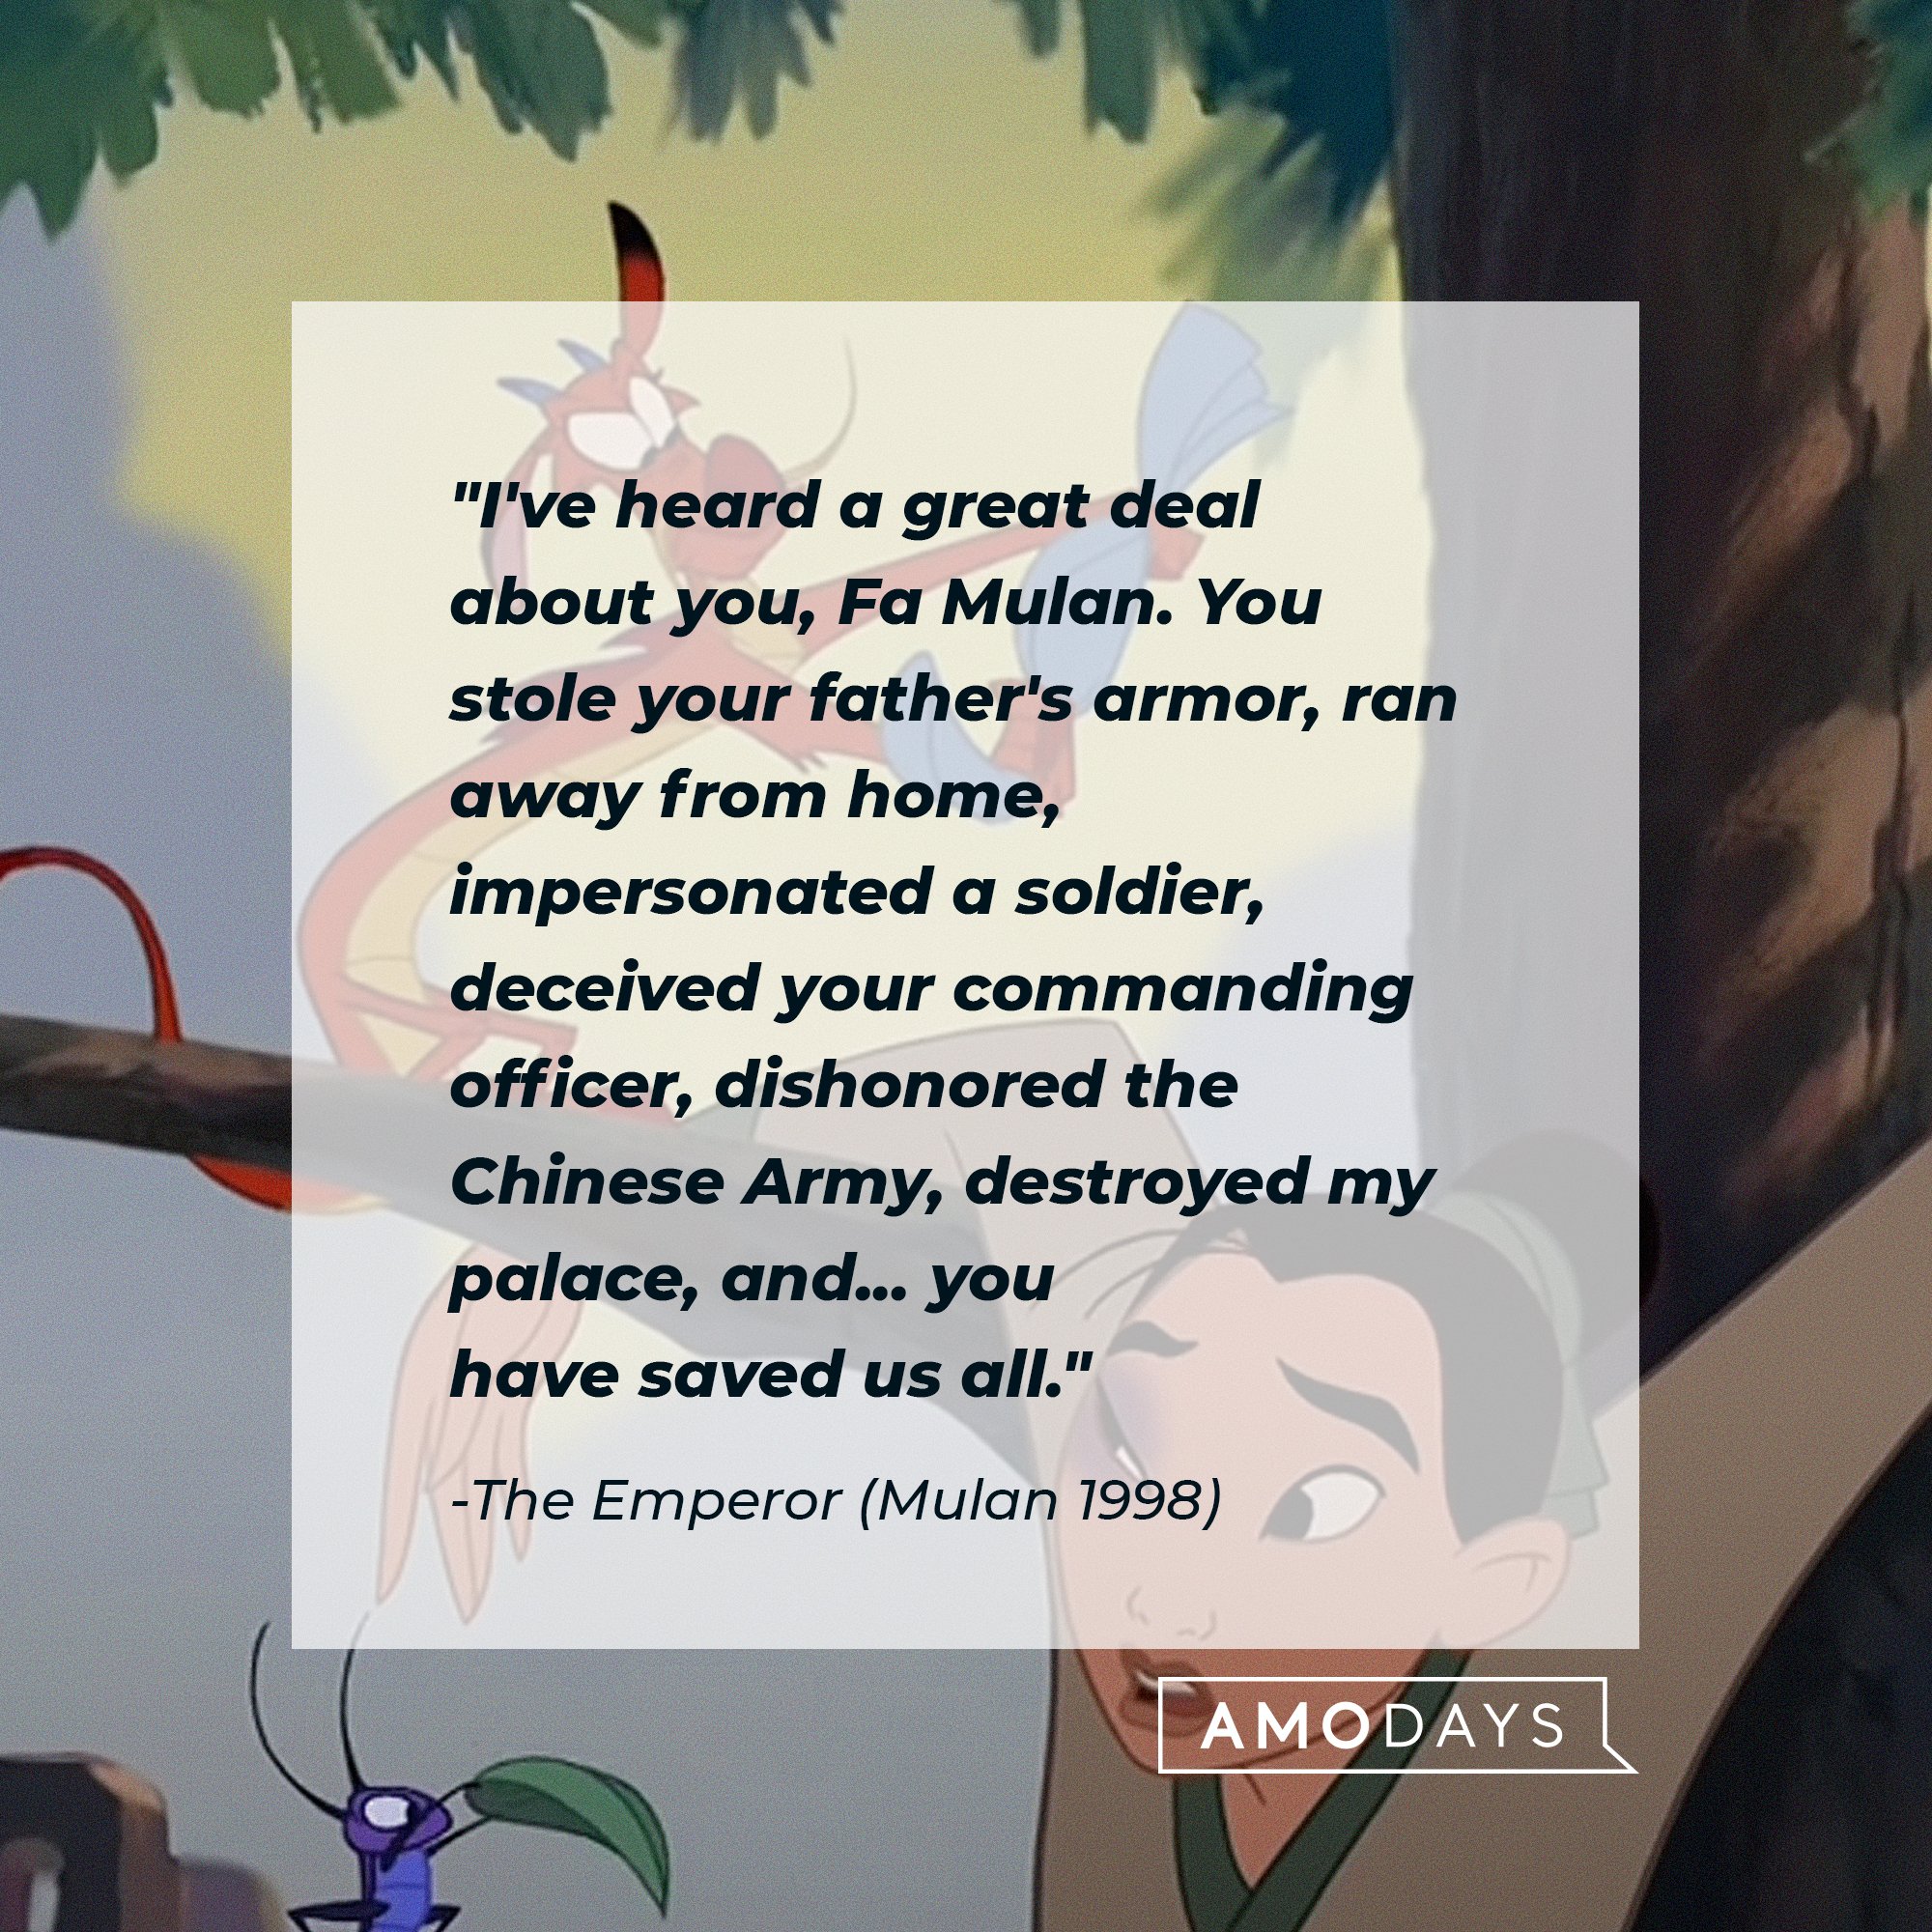 The Emperor's quote: "I've heard a great deal about you, Fa Mulan. You stole your father's armor, ran away from home, impersonated a soldier, deceived your commanding officer, dishonored the Chinese Army, destroyed my palace, and... you have saved us all.” | Image: AmoDays